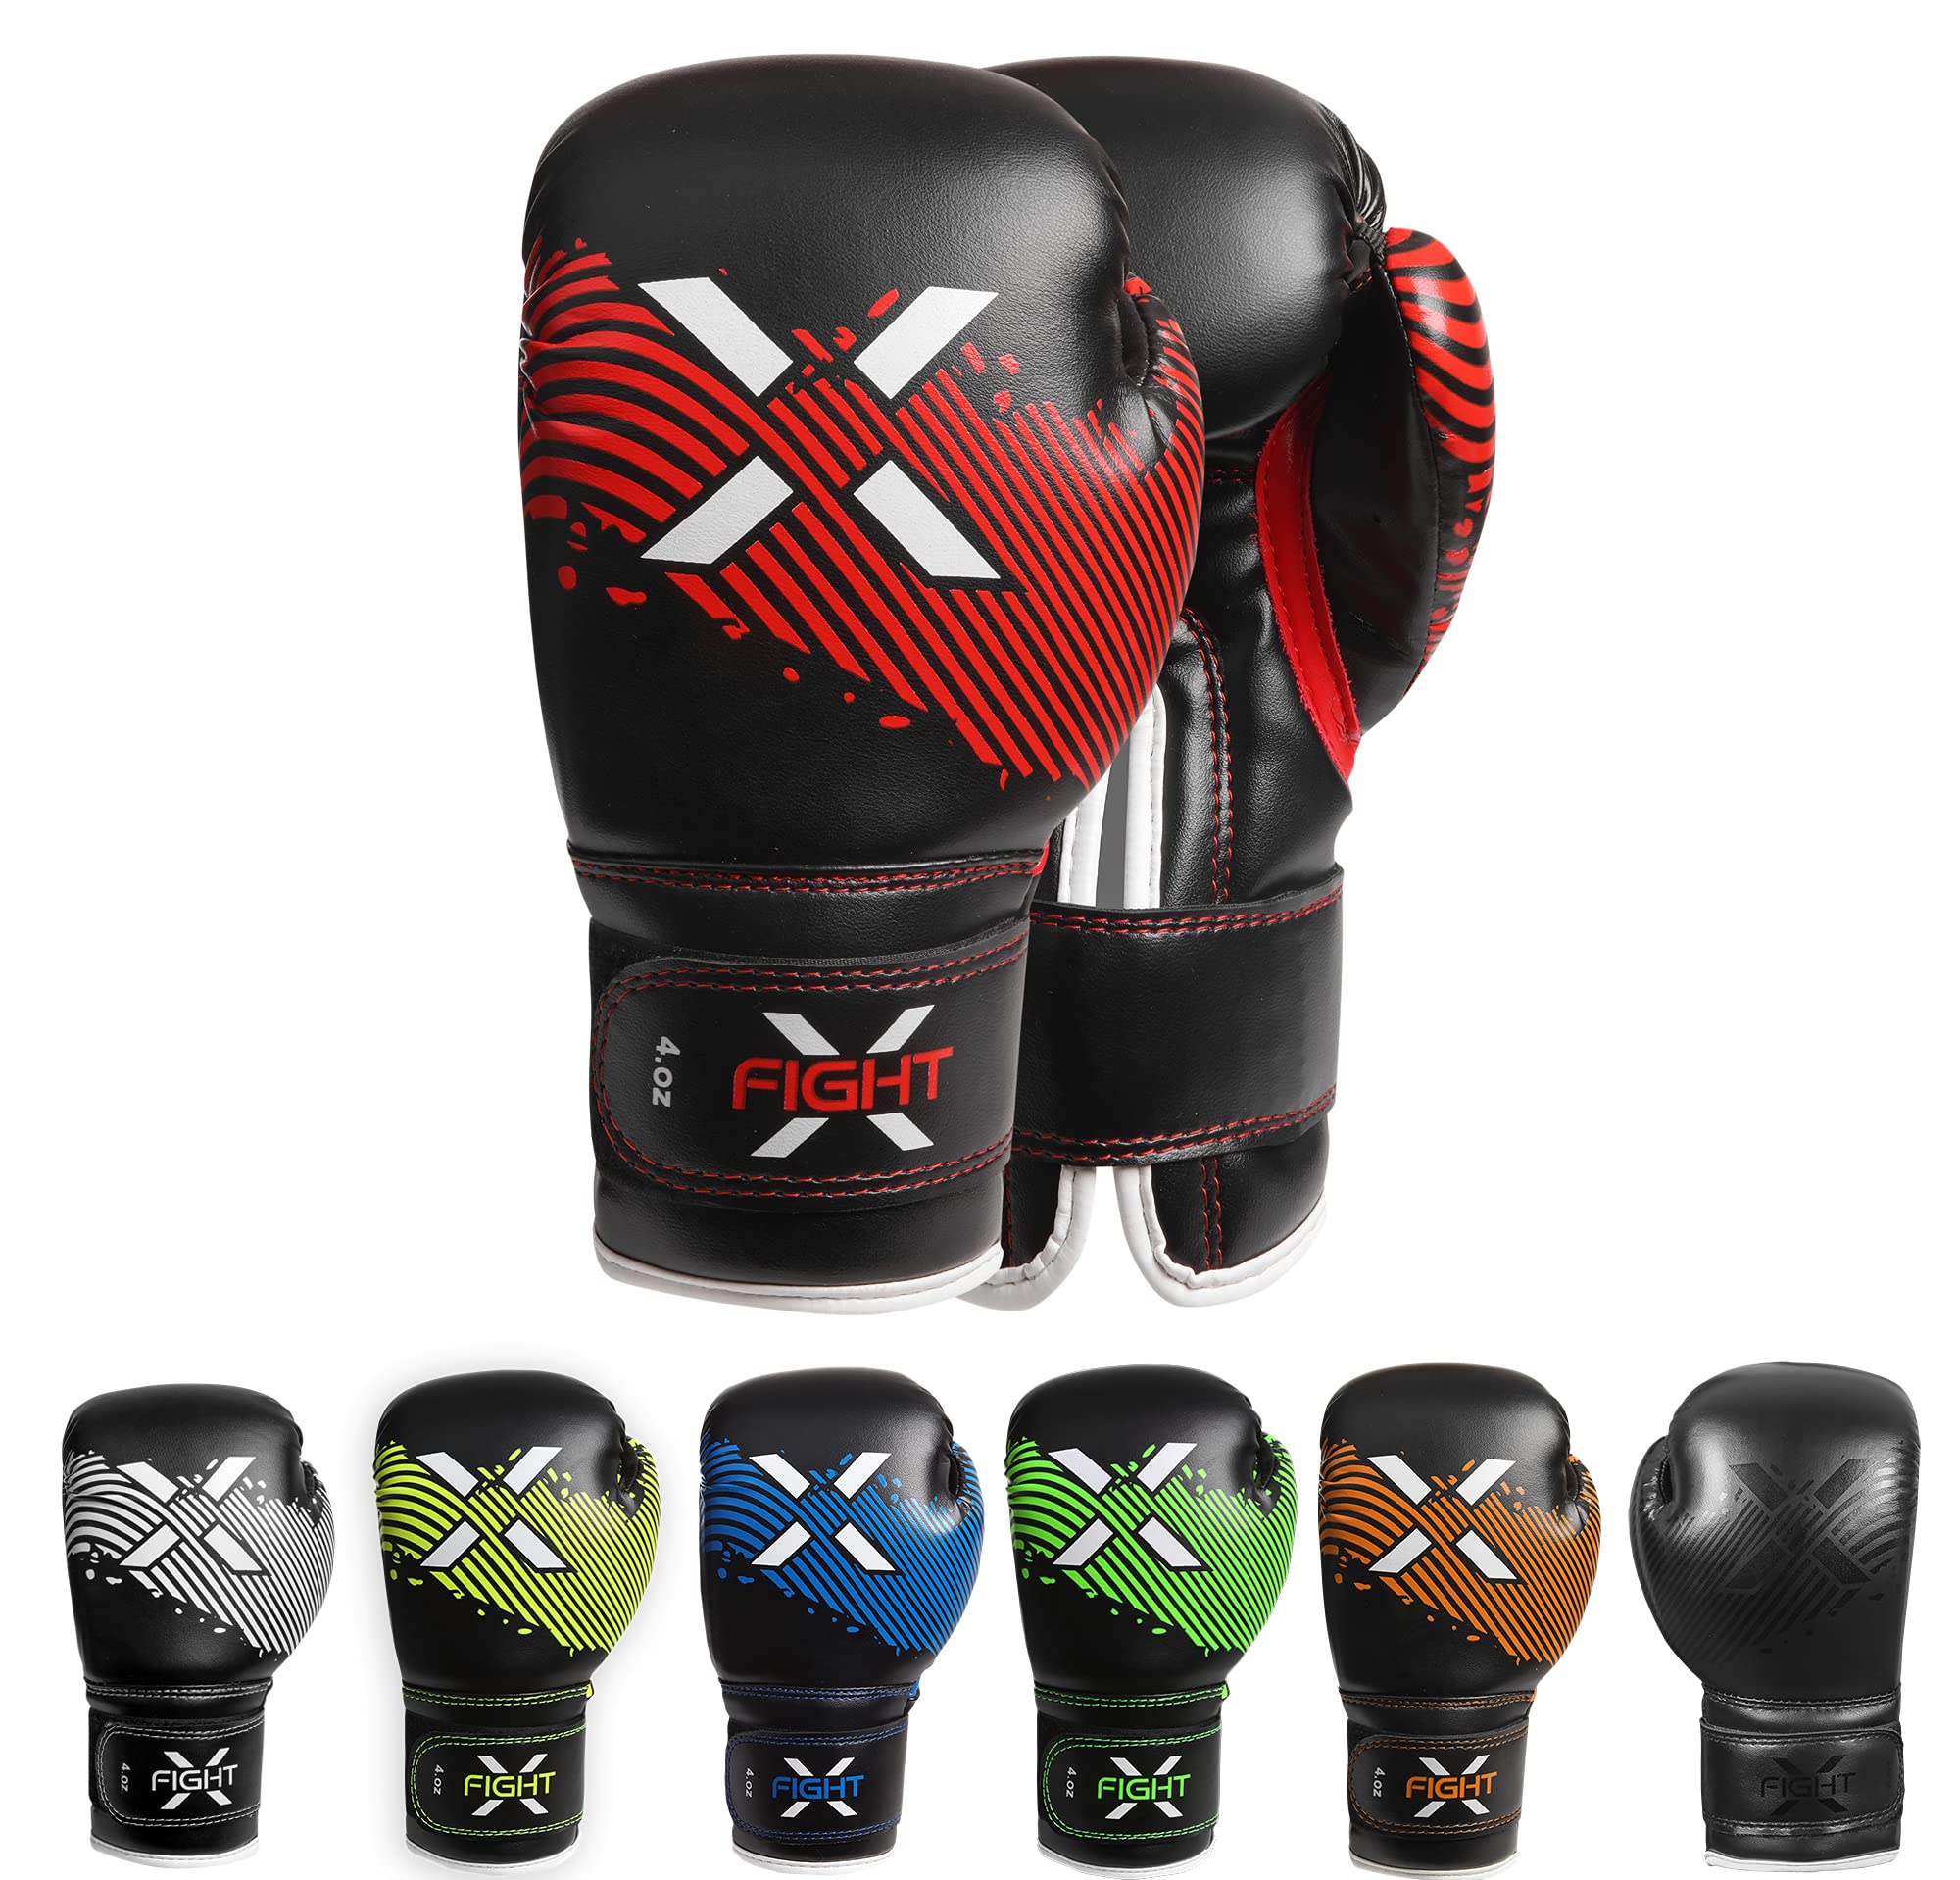 relayinert 1 Pair Kids Boxing Gloves Leather Sparring Fitness Gym